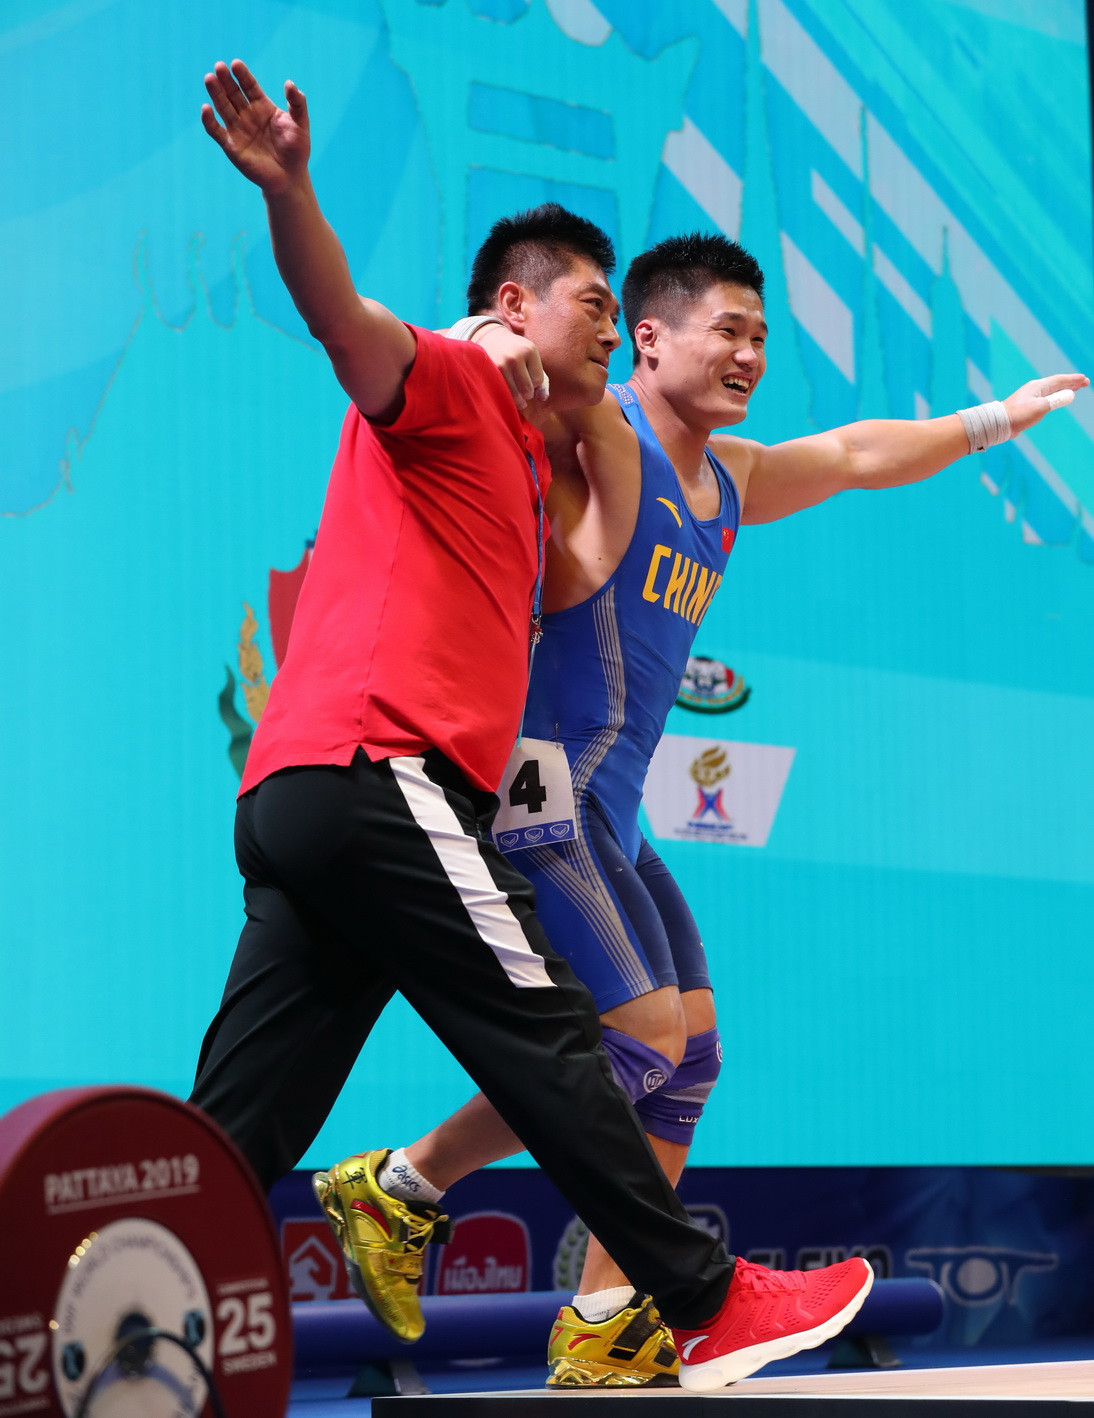 Despite having obvious back pains, Lyu broke the men's 81 kilograms clean and jerk and total world records to seal a clean sweep of the weight category's titles ©IWF